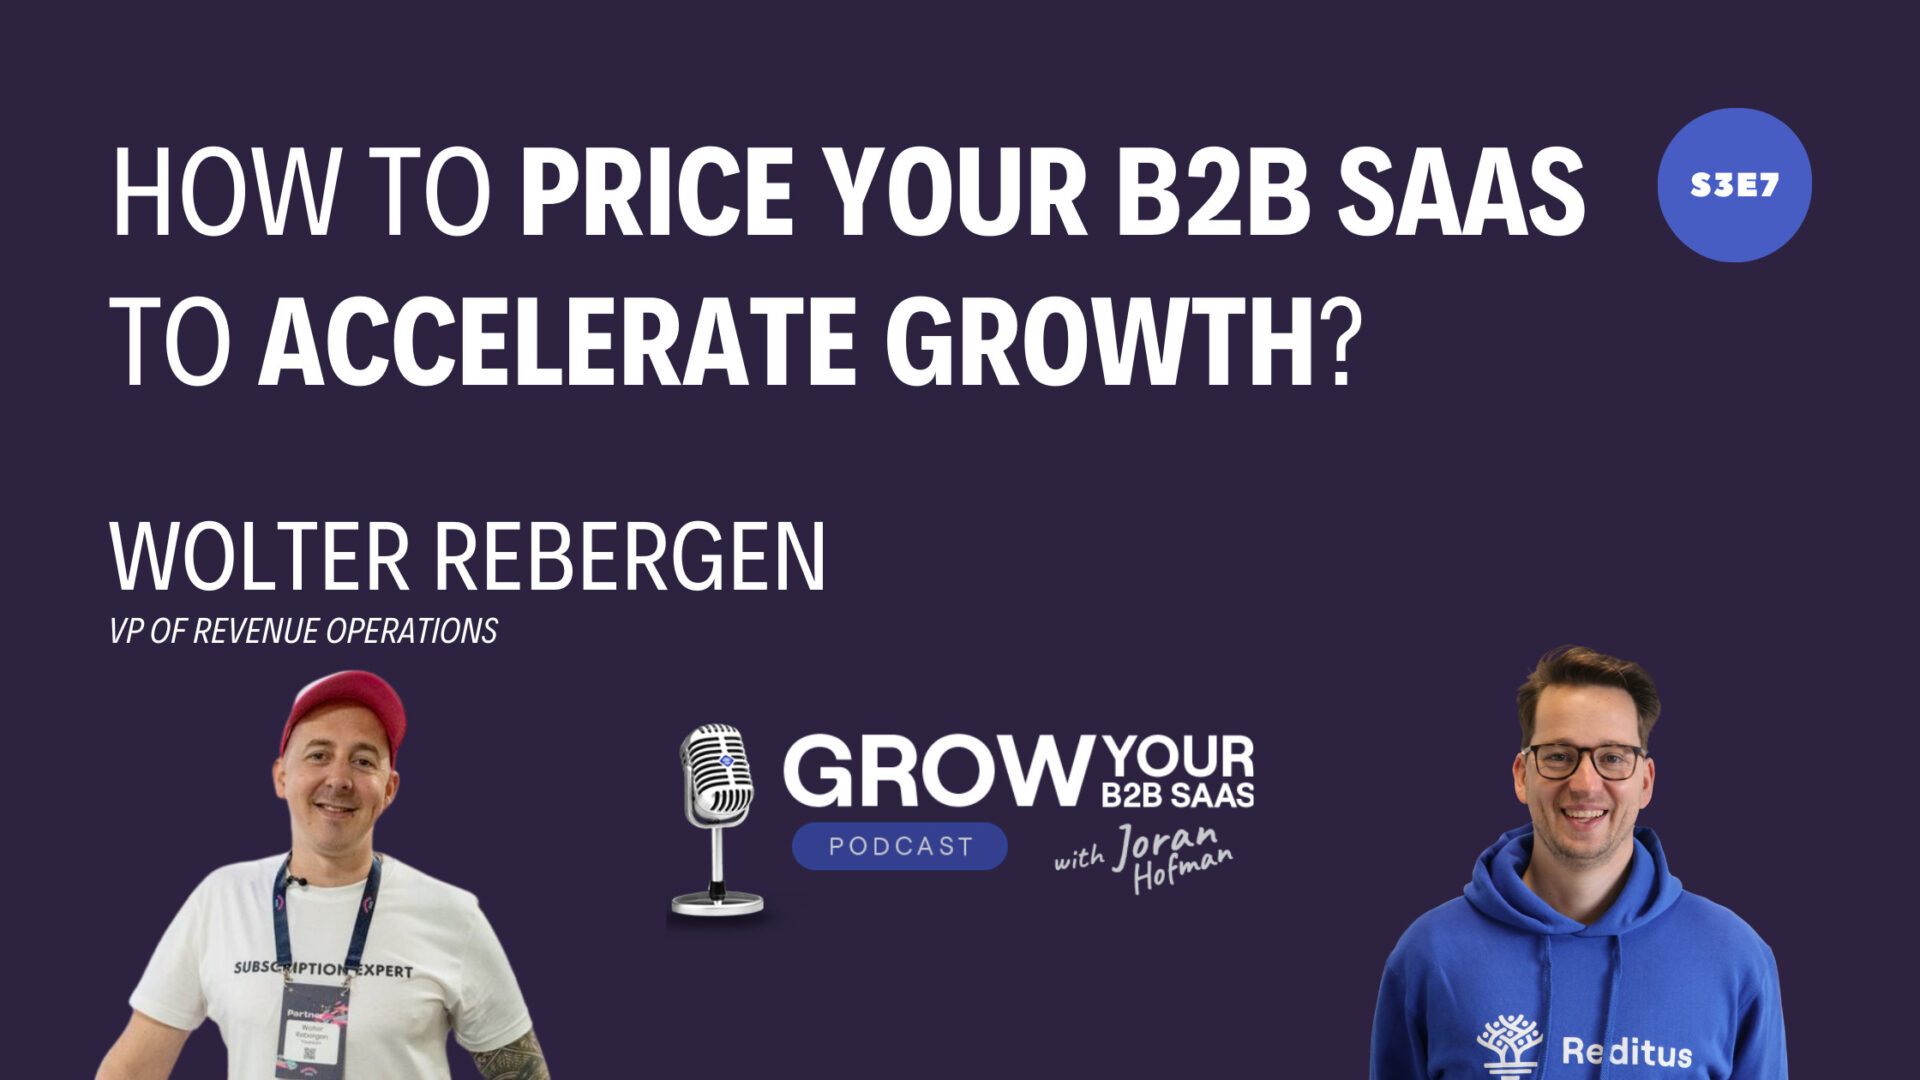 S3E7 – How to price your B2B SaaS to accelerate growth? with Wolter Rebergen